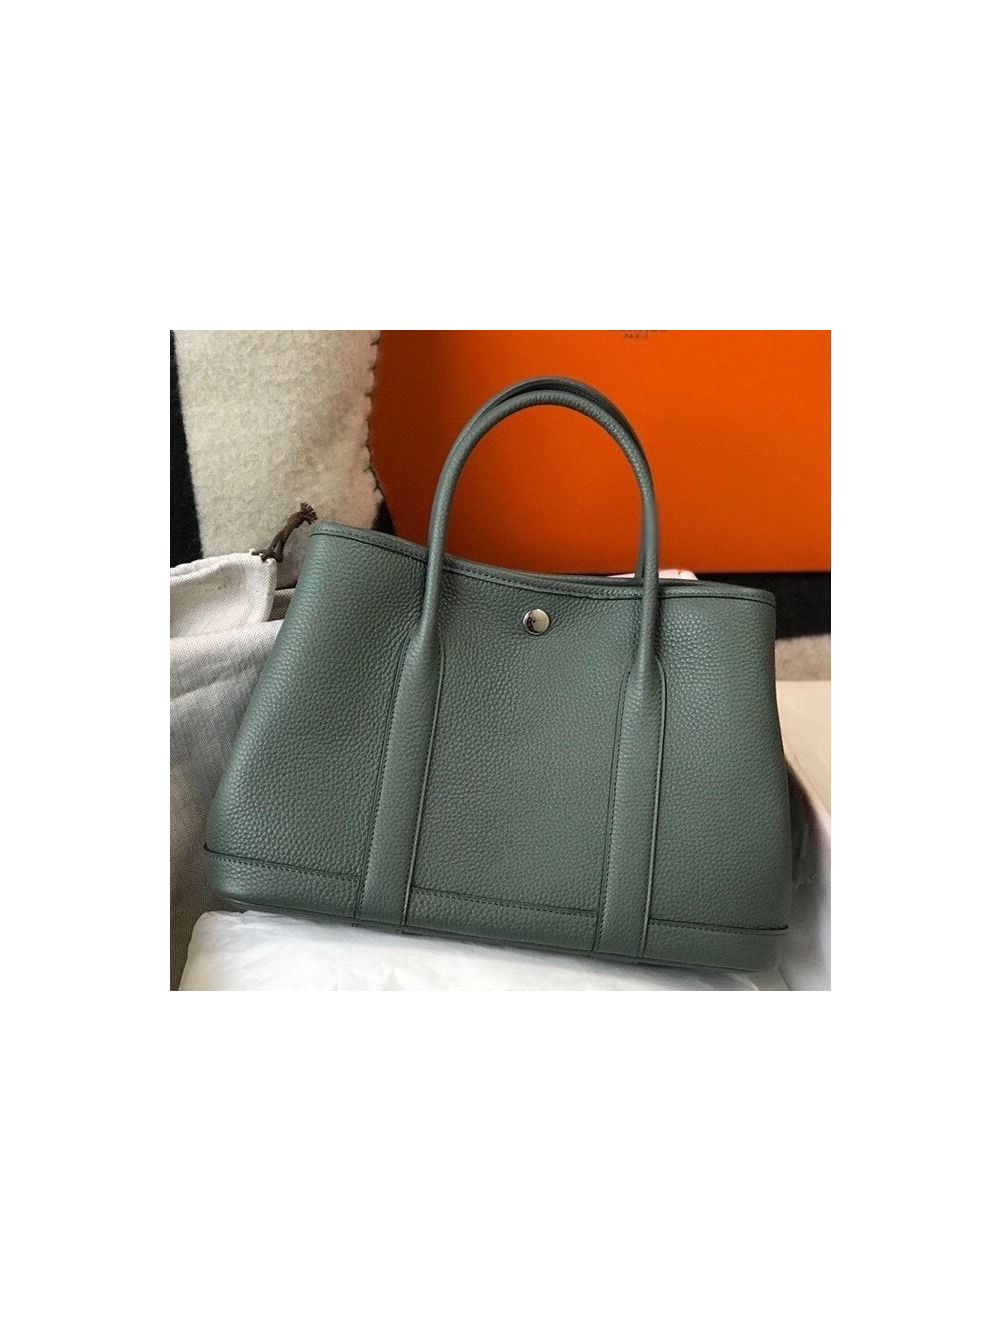 Hermes, Bags, Herms Garden Party Leather ia 36 Cm